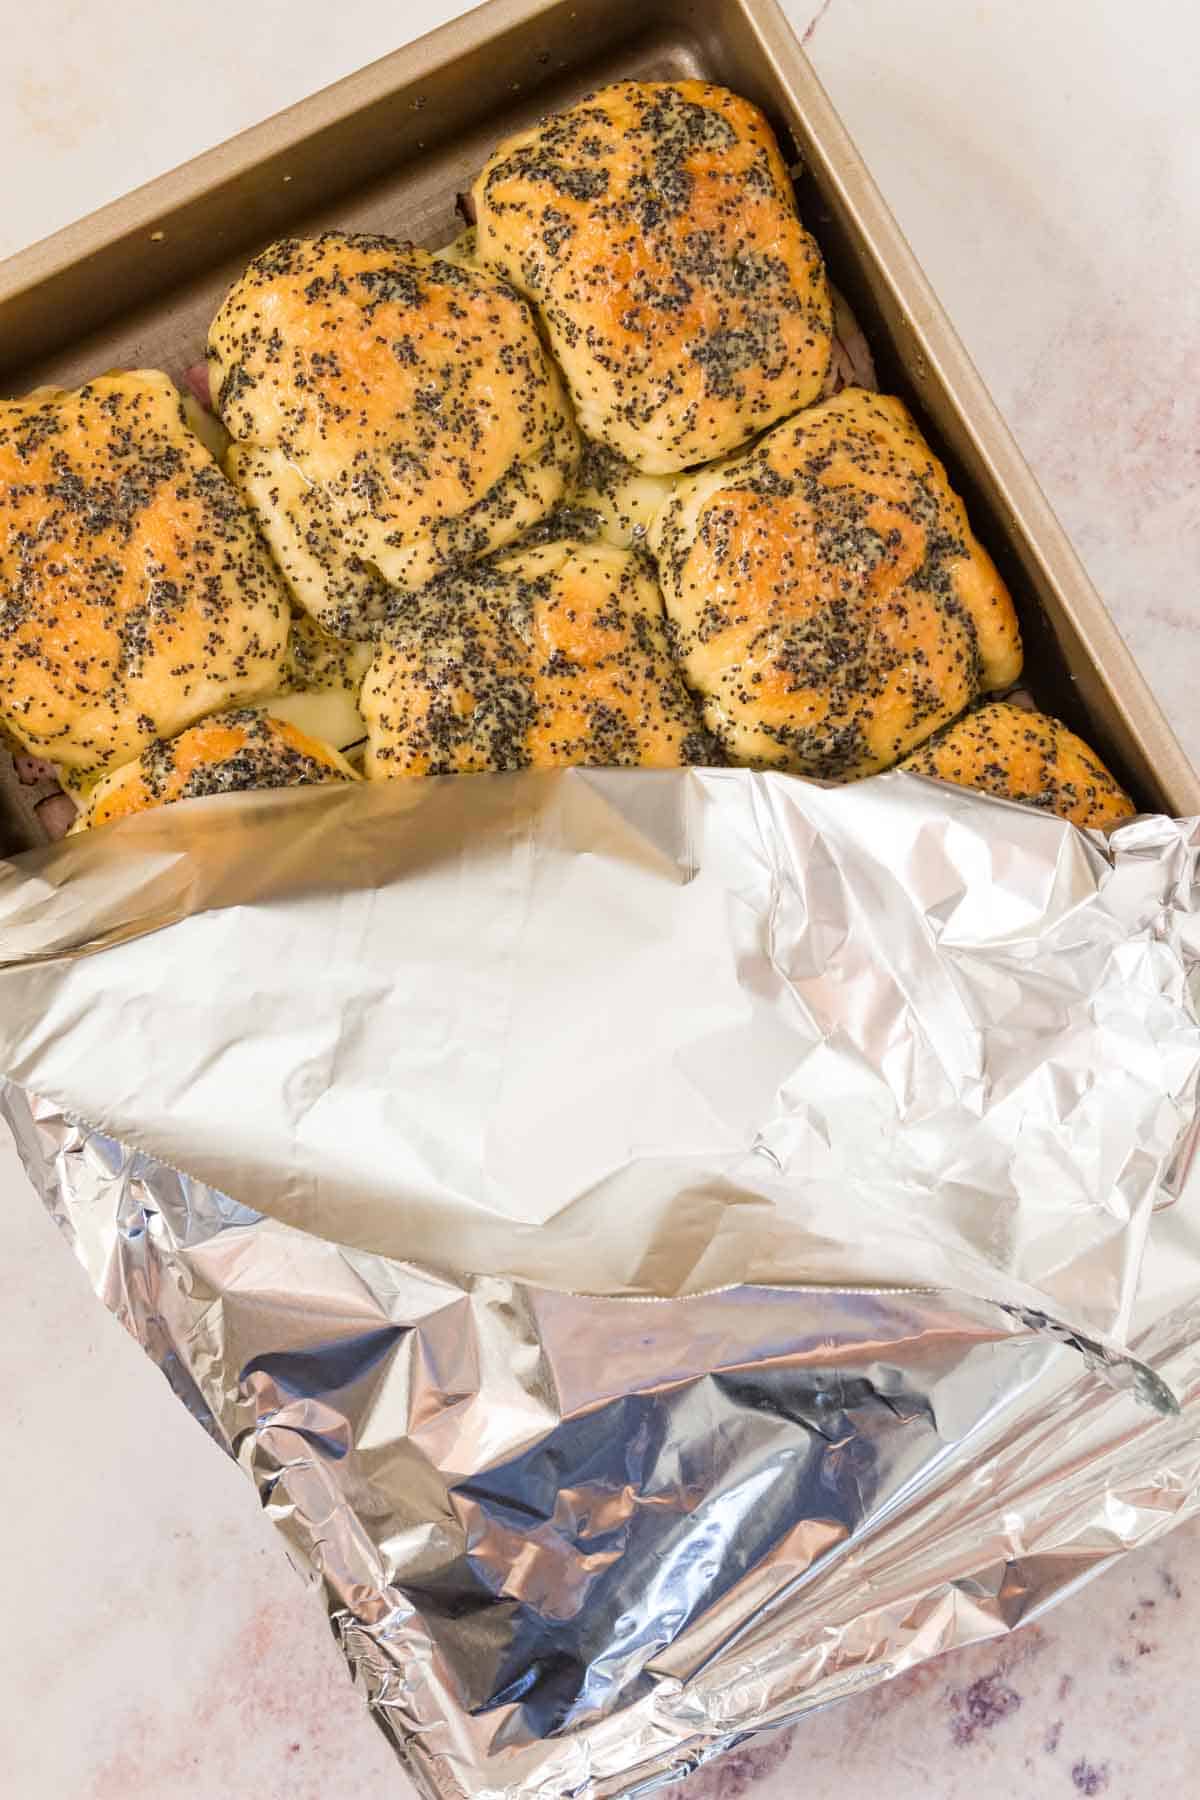 A pan of gluten-free ham and cheese sliders partially covered with aluminum foil.